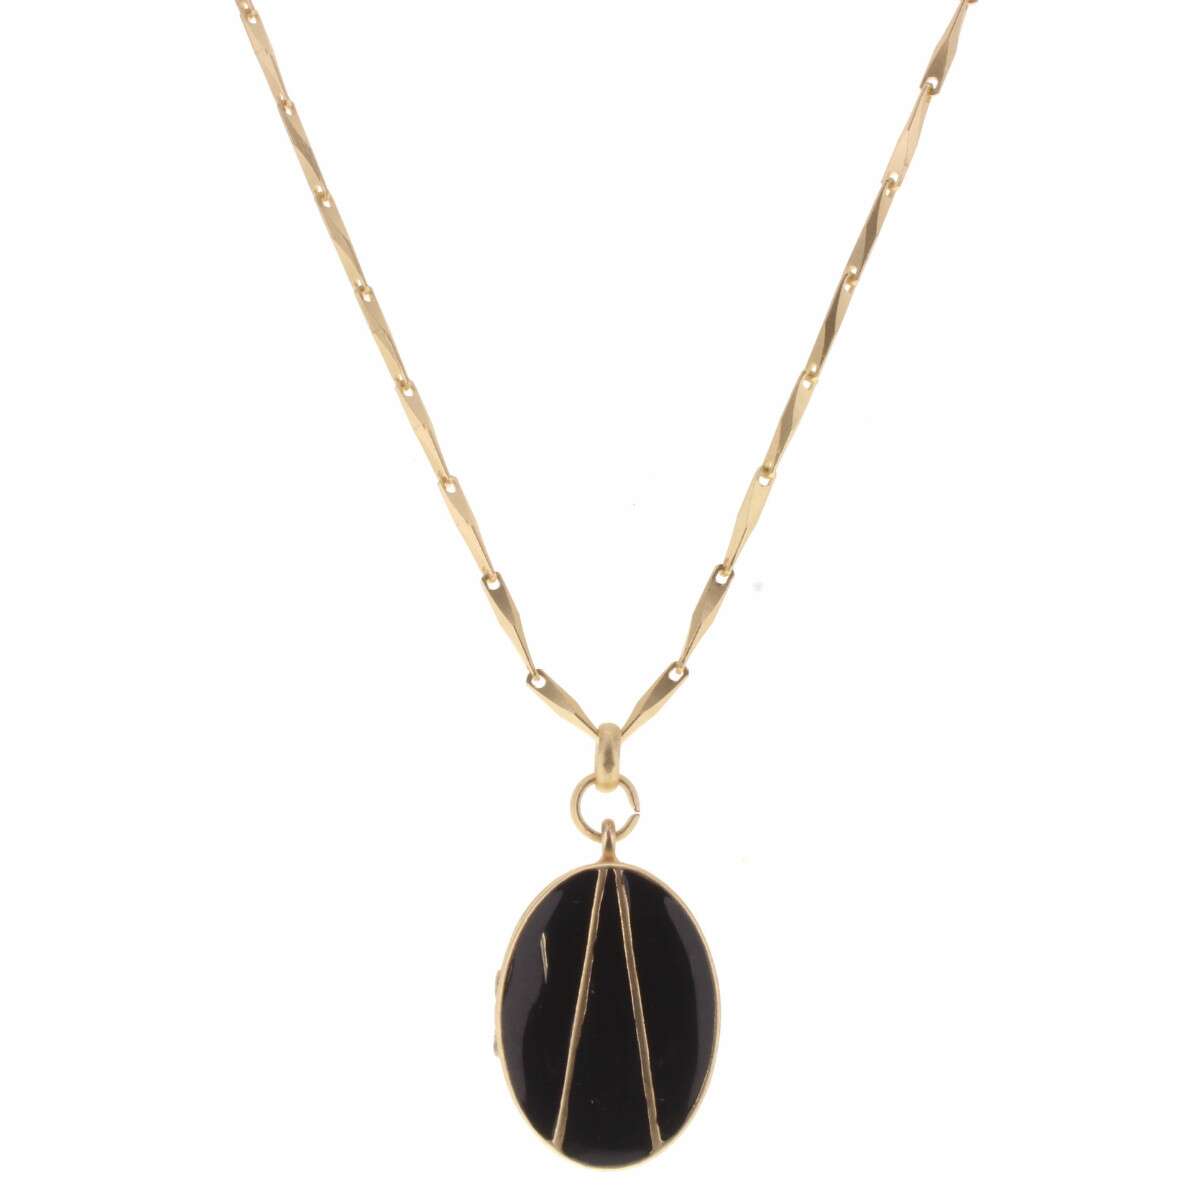 32" Black Oval Epoxy Locket with Gold Line Detailing Necklace, 3" Ext.